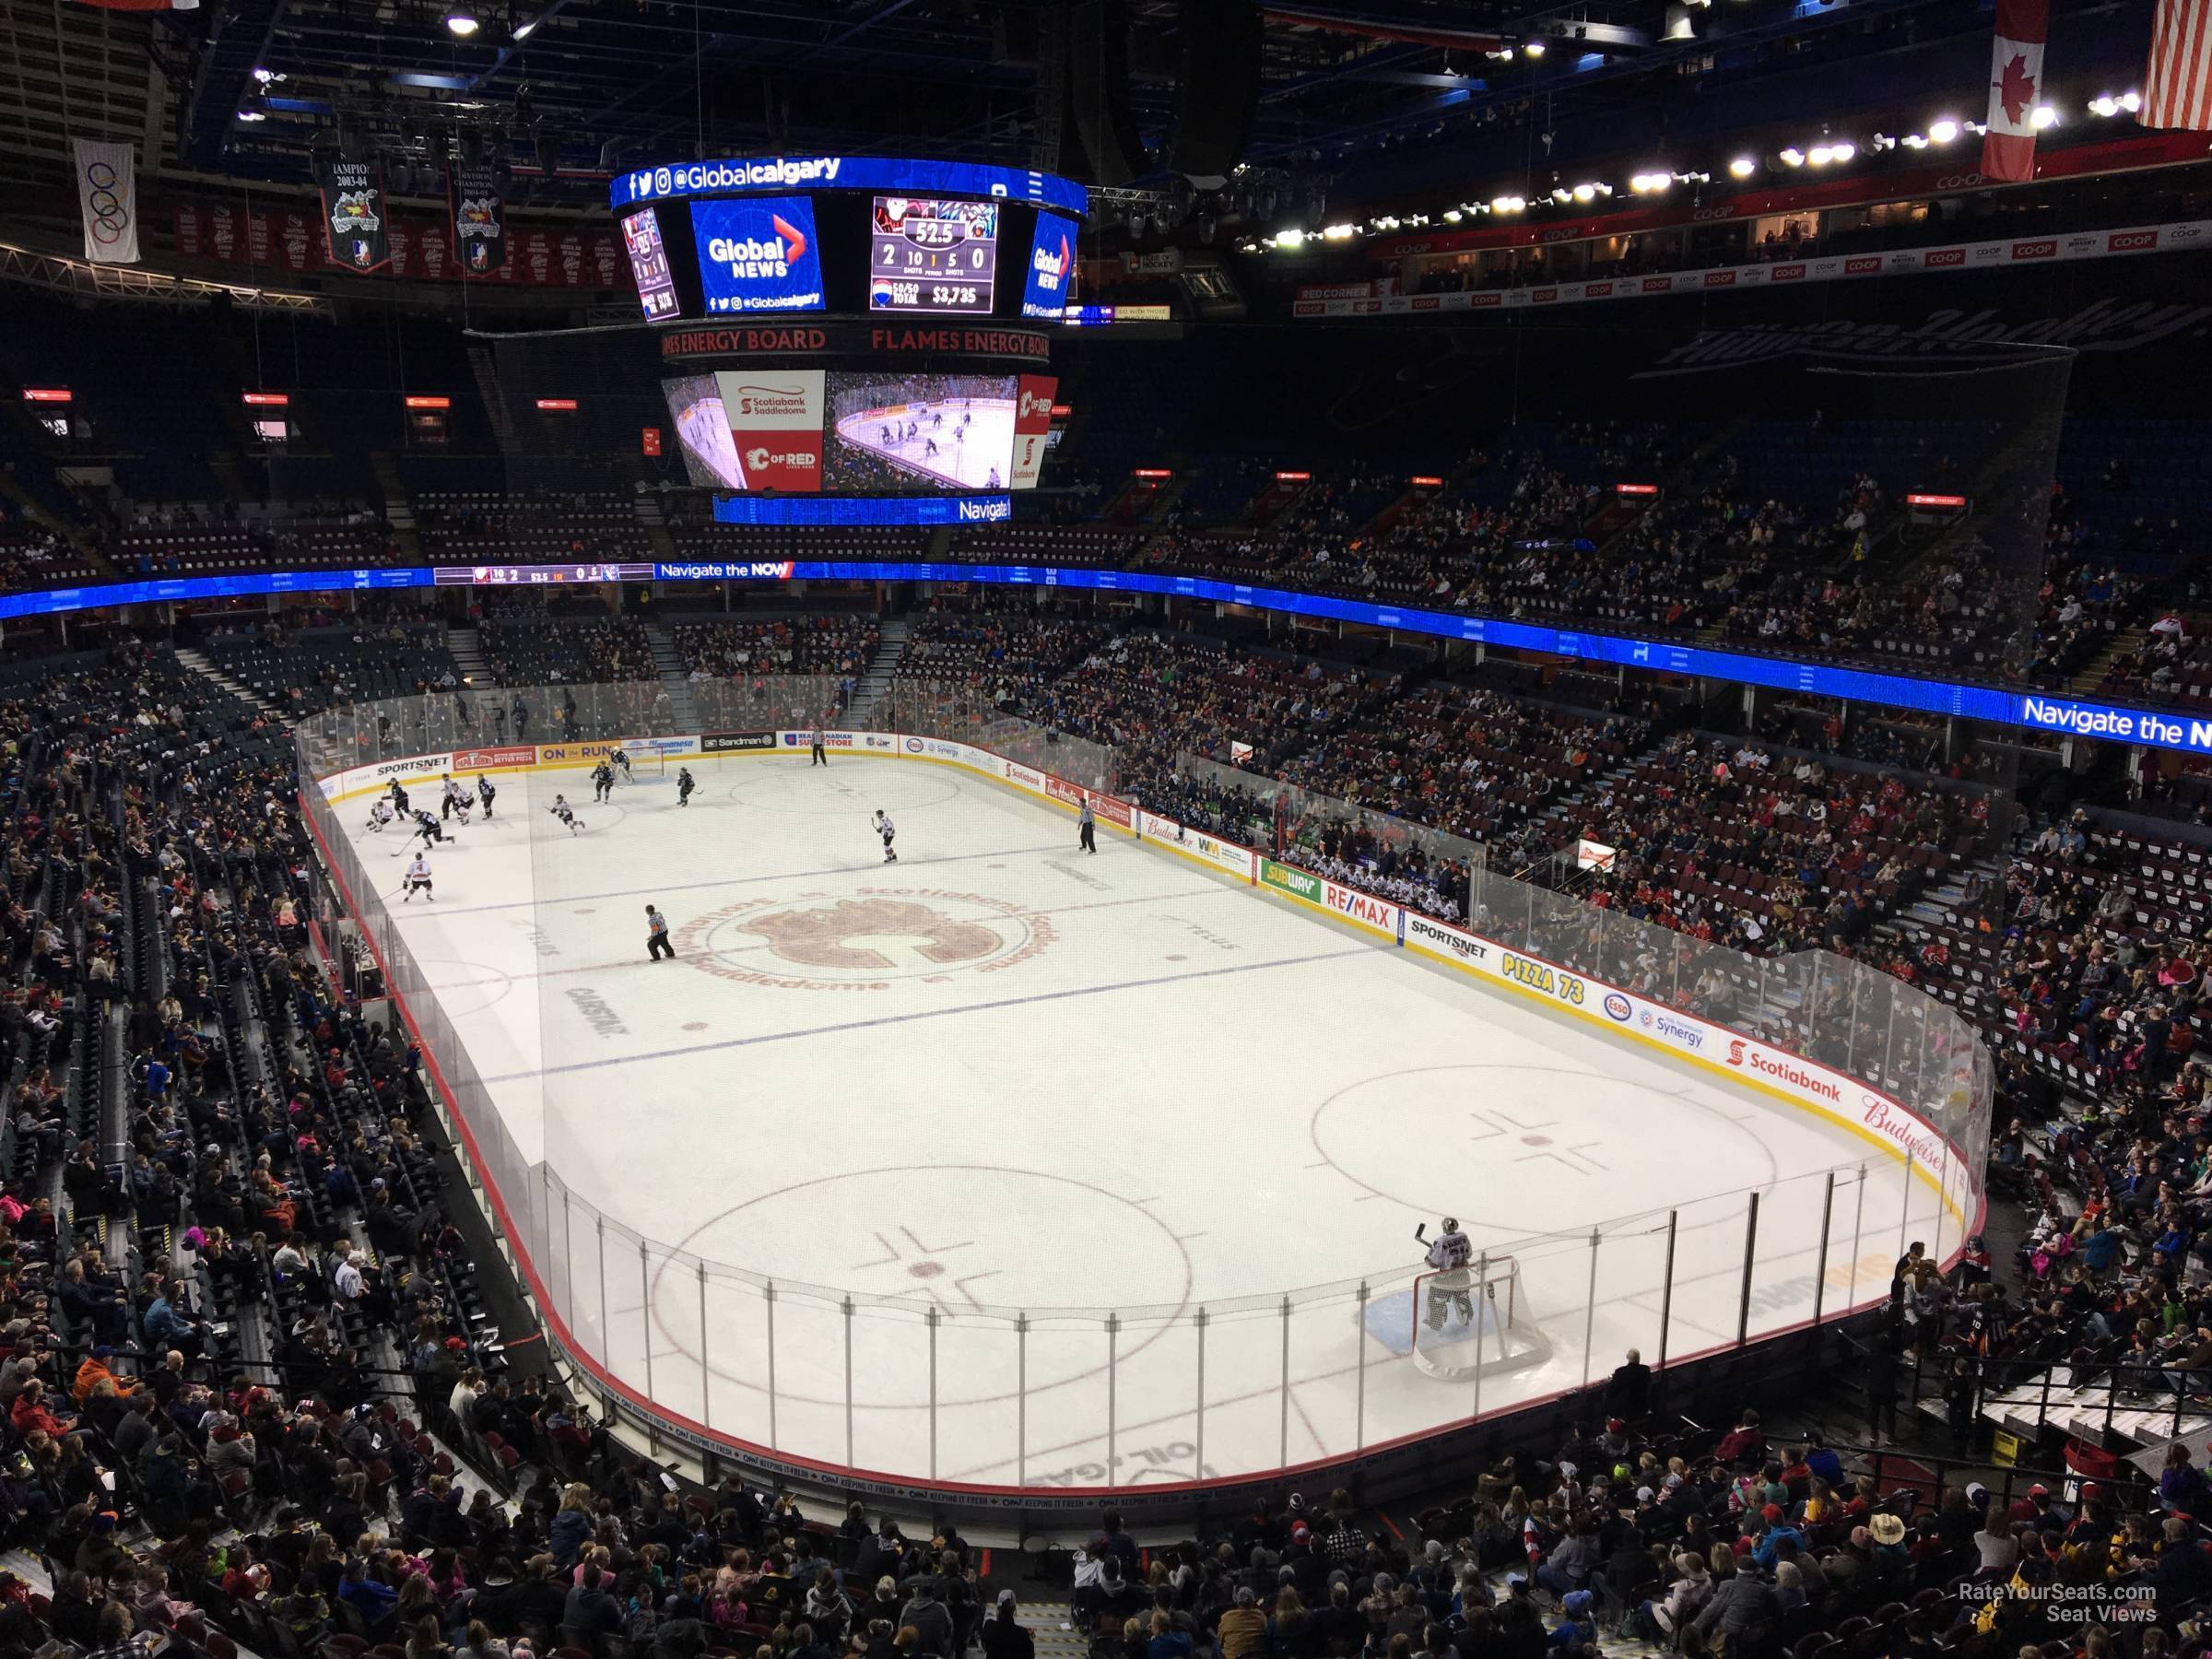 section 204, row 12 seat view  for hockey - scotiabank saddledome